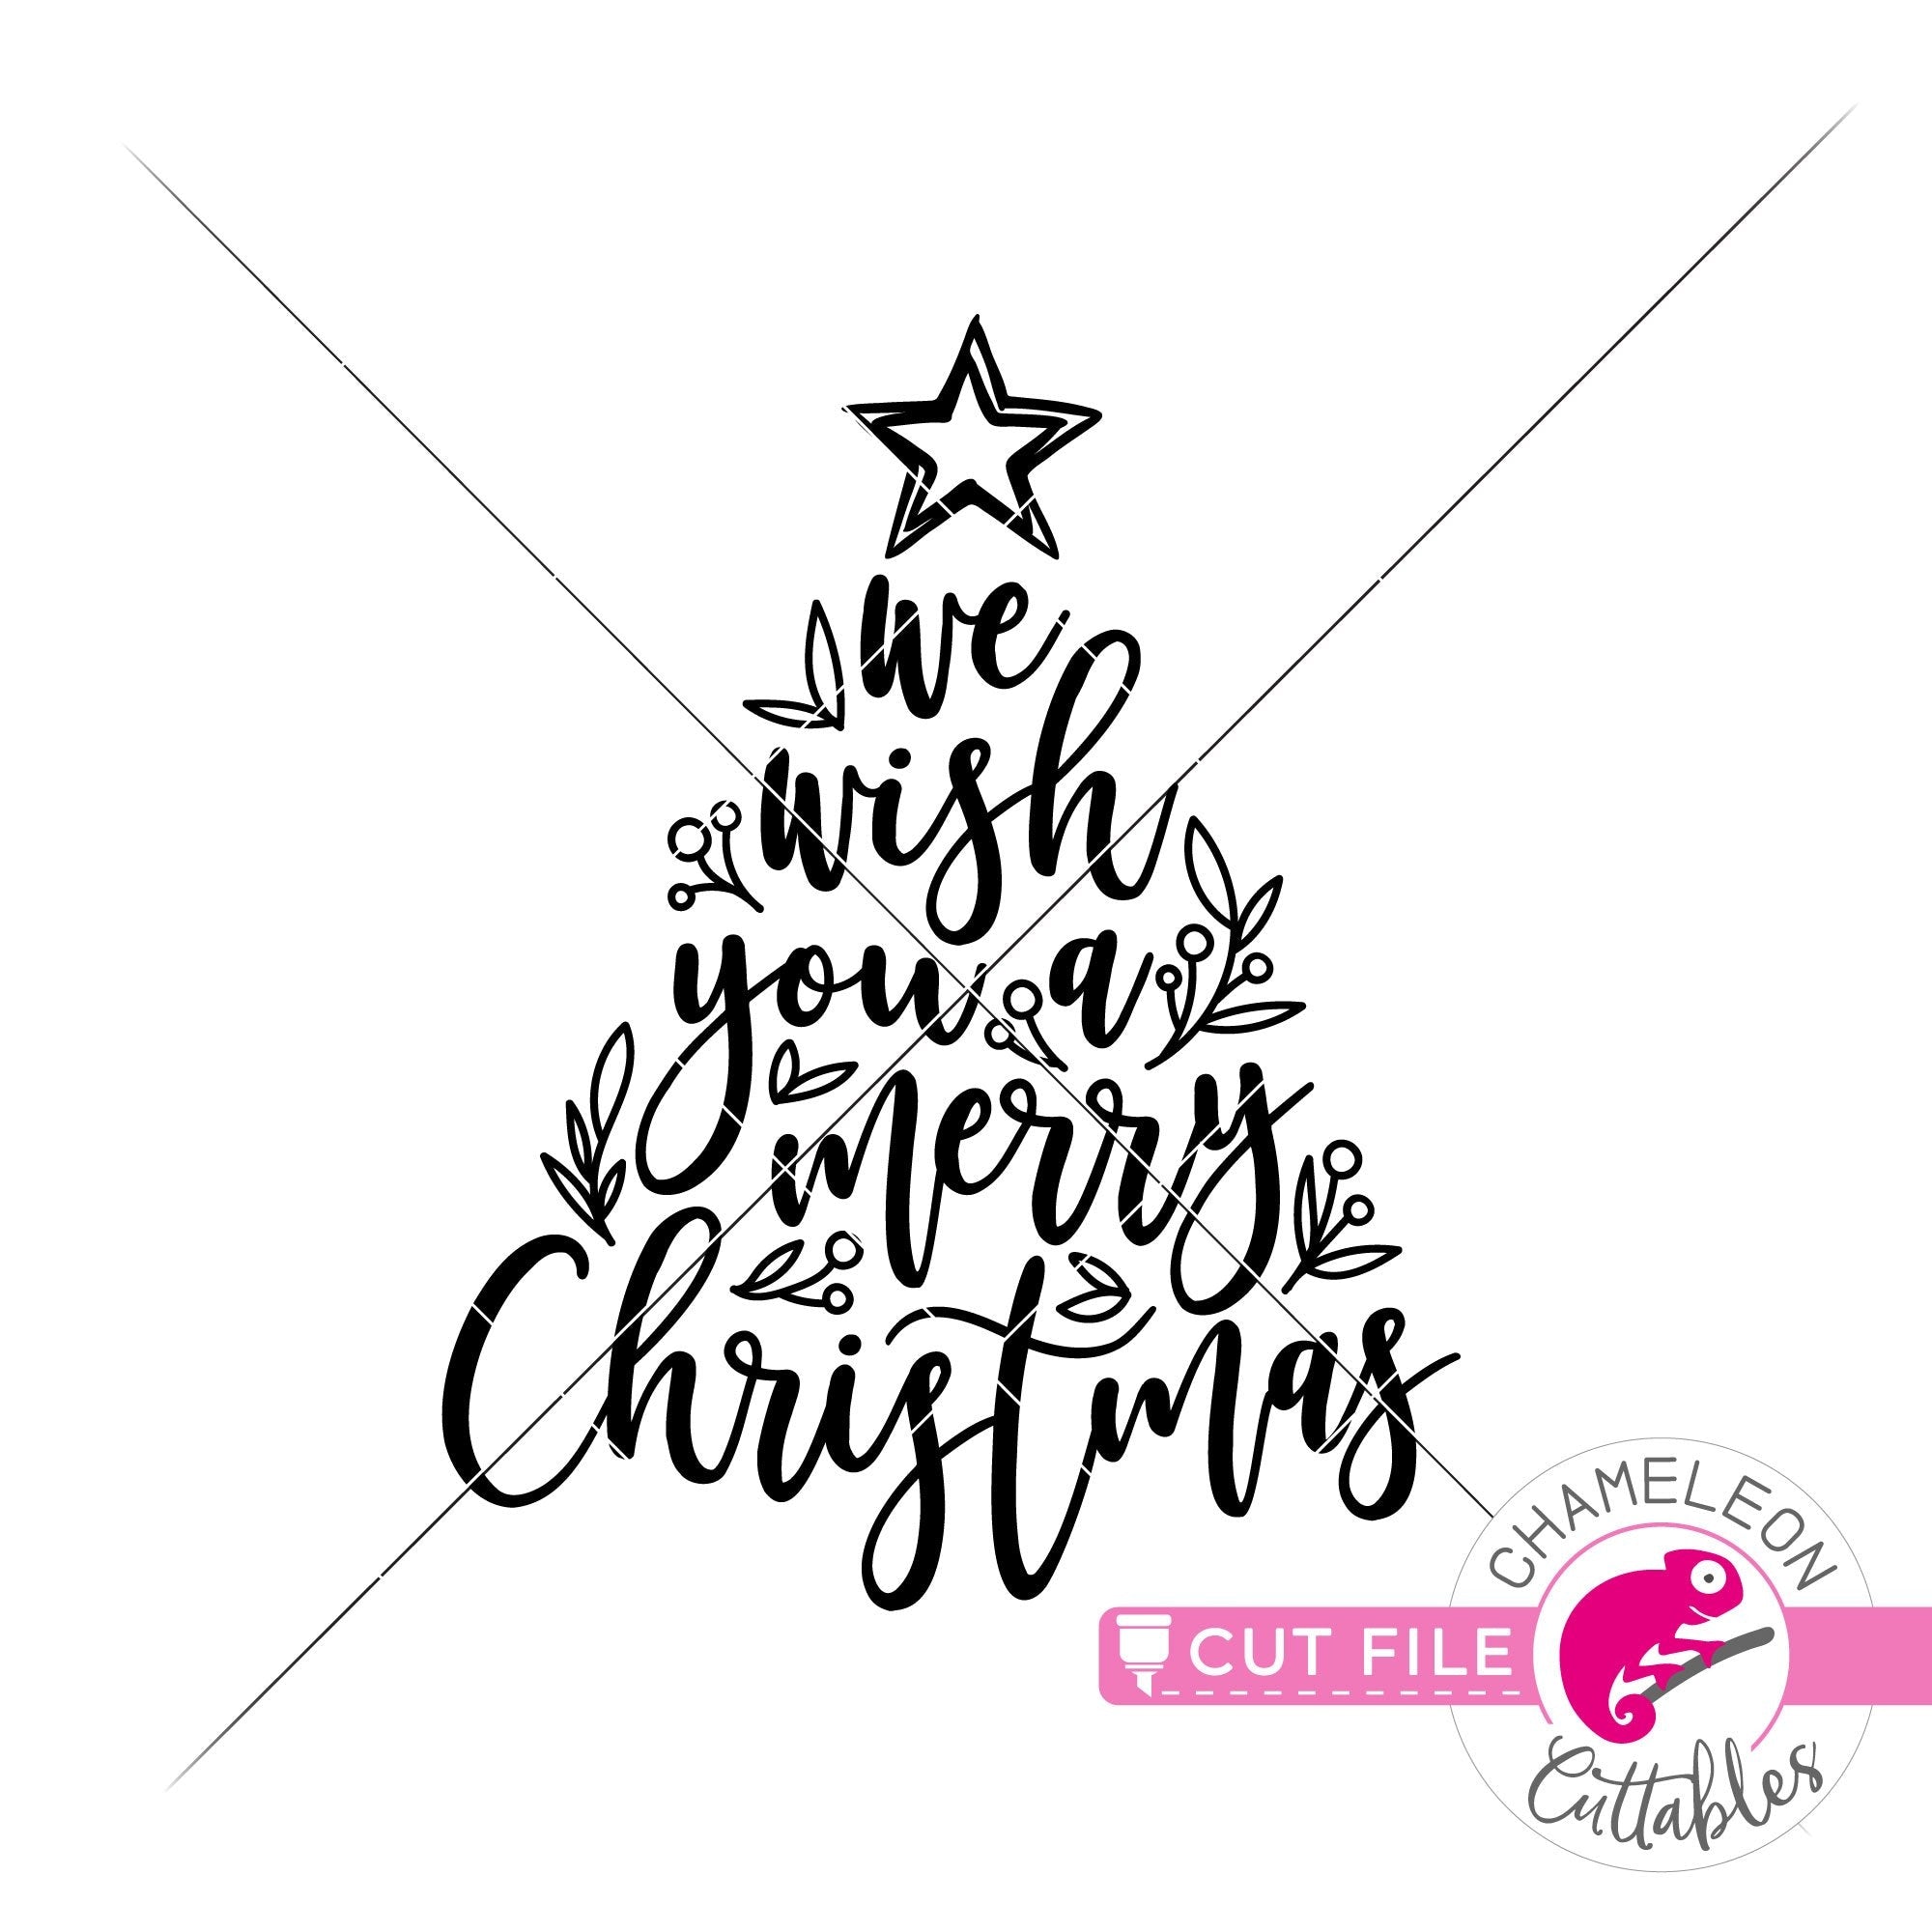 Download We Wish You A Merry Christmas Tree Svg Png Dxf Eps Jpeg Chameleon Cuttables Llc Chameleon Cuttables Llc